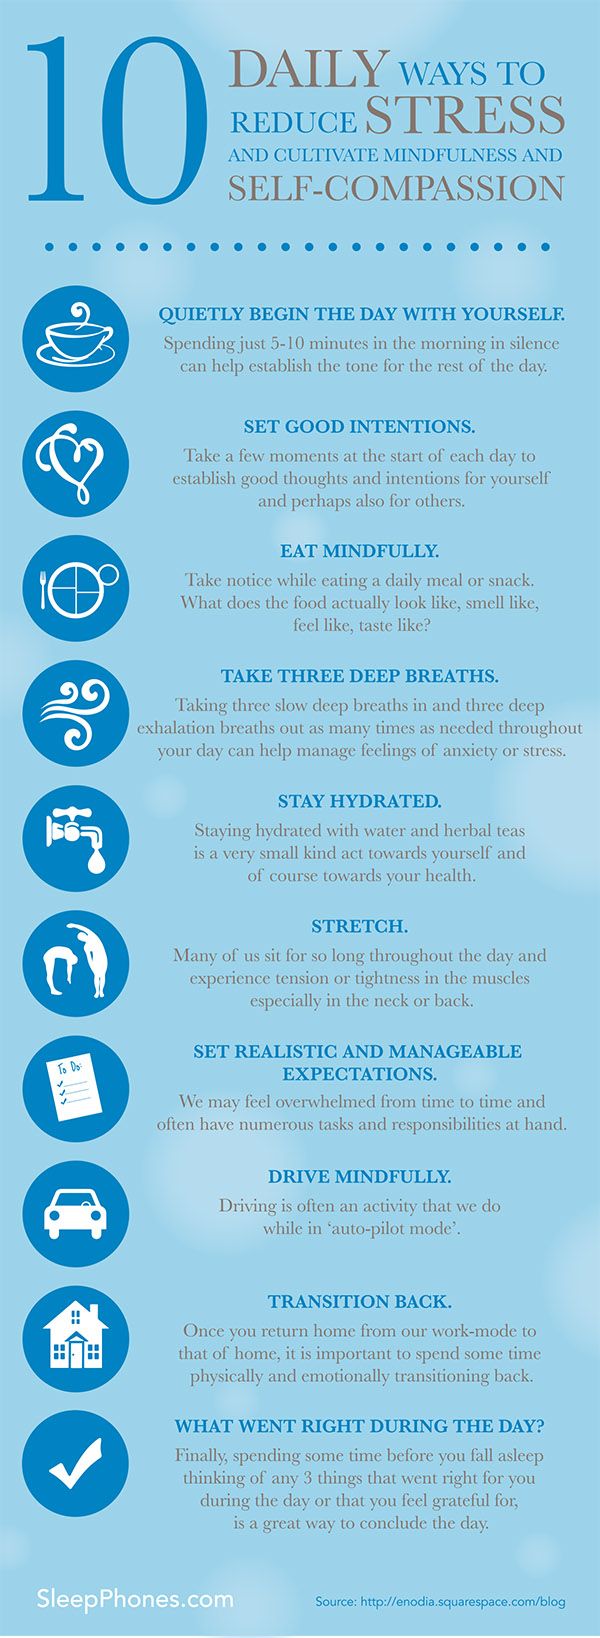 Psychology-Infographic-10-Daily-ways-to-reduce-stress-and-cultivate-mindfulness-and-self-compassion Psychology Infographic : 10 Daily ways to reduce stress and cultivate mindfulness and self-compassion.